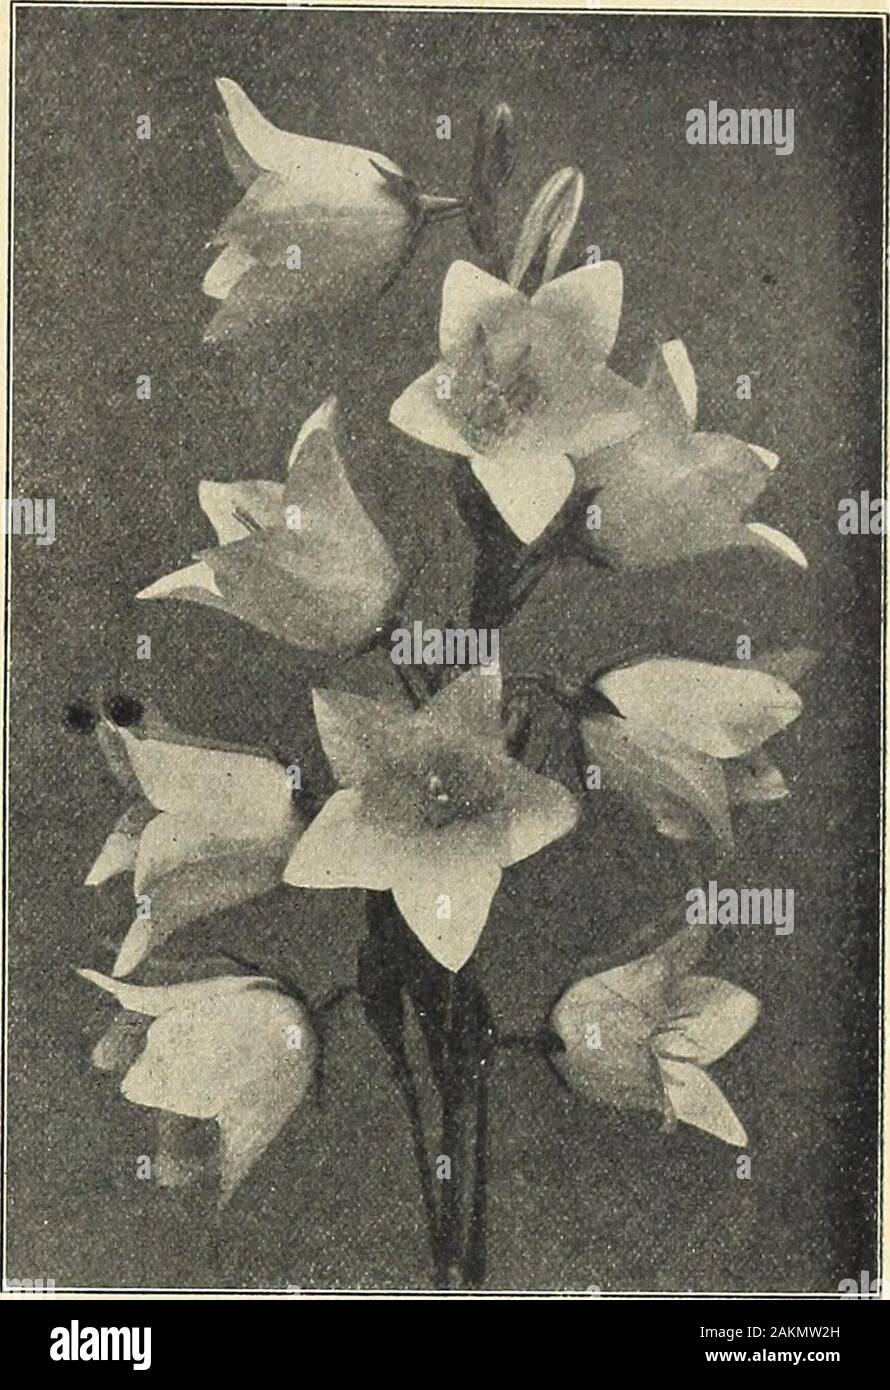 Farquhar's garden annual : 1918 . rowing plantproducing spikes of pea-shaped blue flowers six inches in length.June and July. 2^ ft. ... ... ... i oz., .25; 6225 BOCCONIA Japonica. {Plume Poppy, or Tree Celandine.) Anoble hardy perennial, with large glaucous leaves and taUflower stems with terminal panicles of white flowers. Usefulfor planting as a background in large beds. July and Aug.6 to 8 ft Oz., .50; 62.30 BOLTONIA Asteroides. One of the showiest of our nativeperennials closely resembling and aUied to the hardy Asters;flowers pure white. Aug. and Sept. 6 ft. ... 6235 Latisquama. Flowers Stock Photo